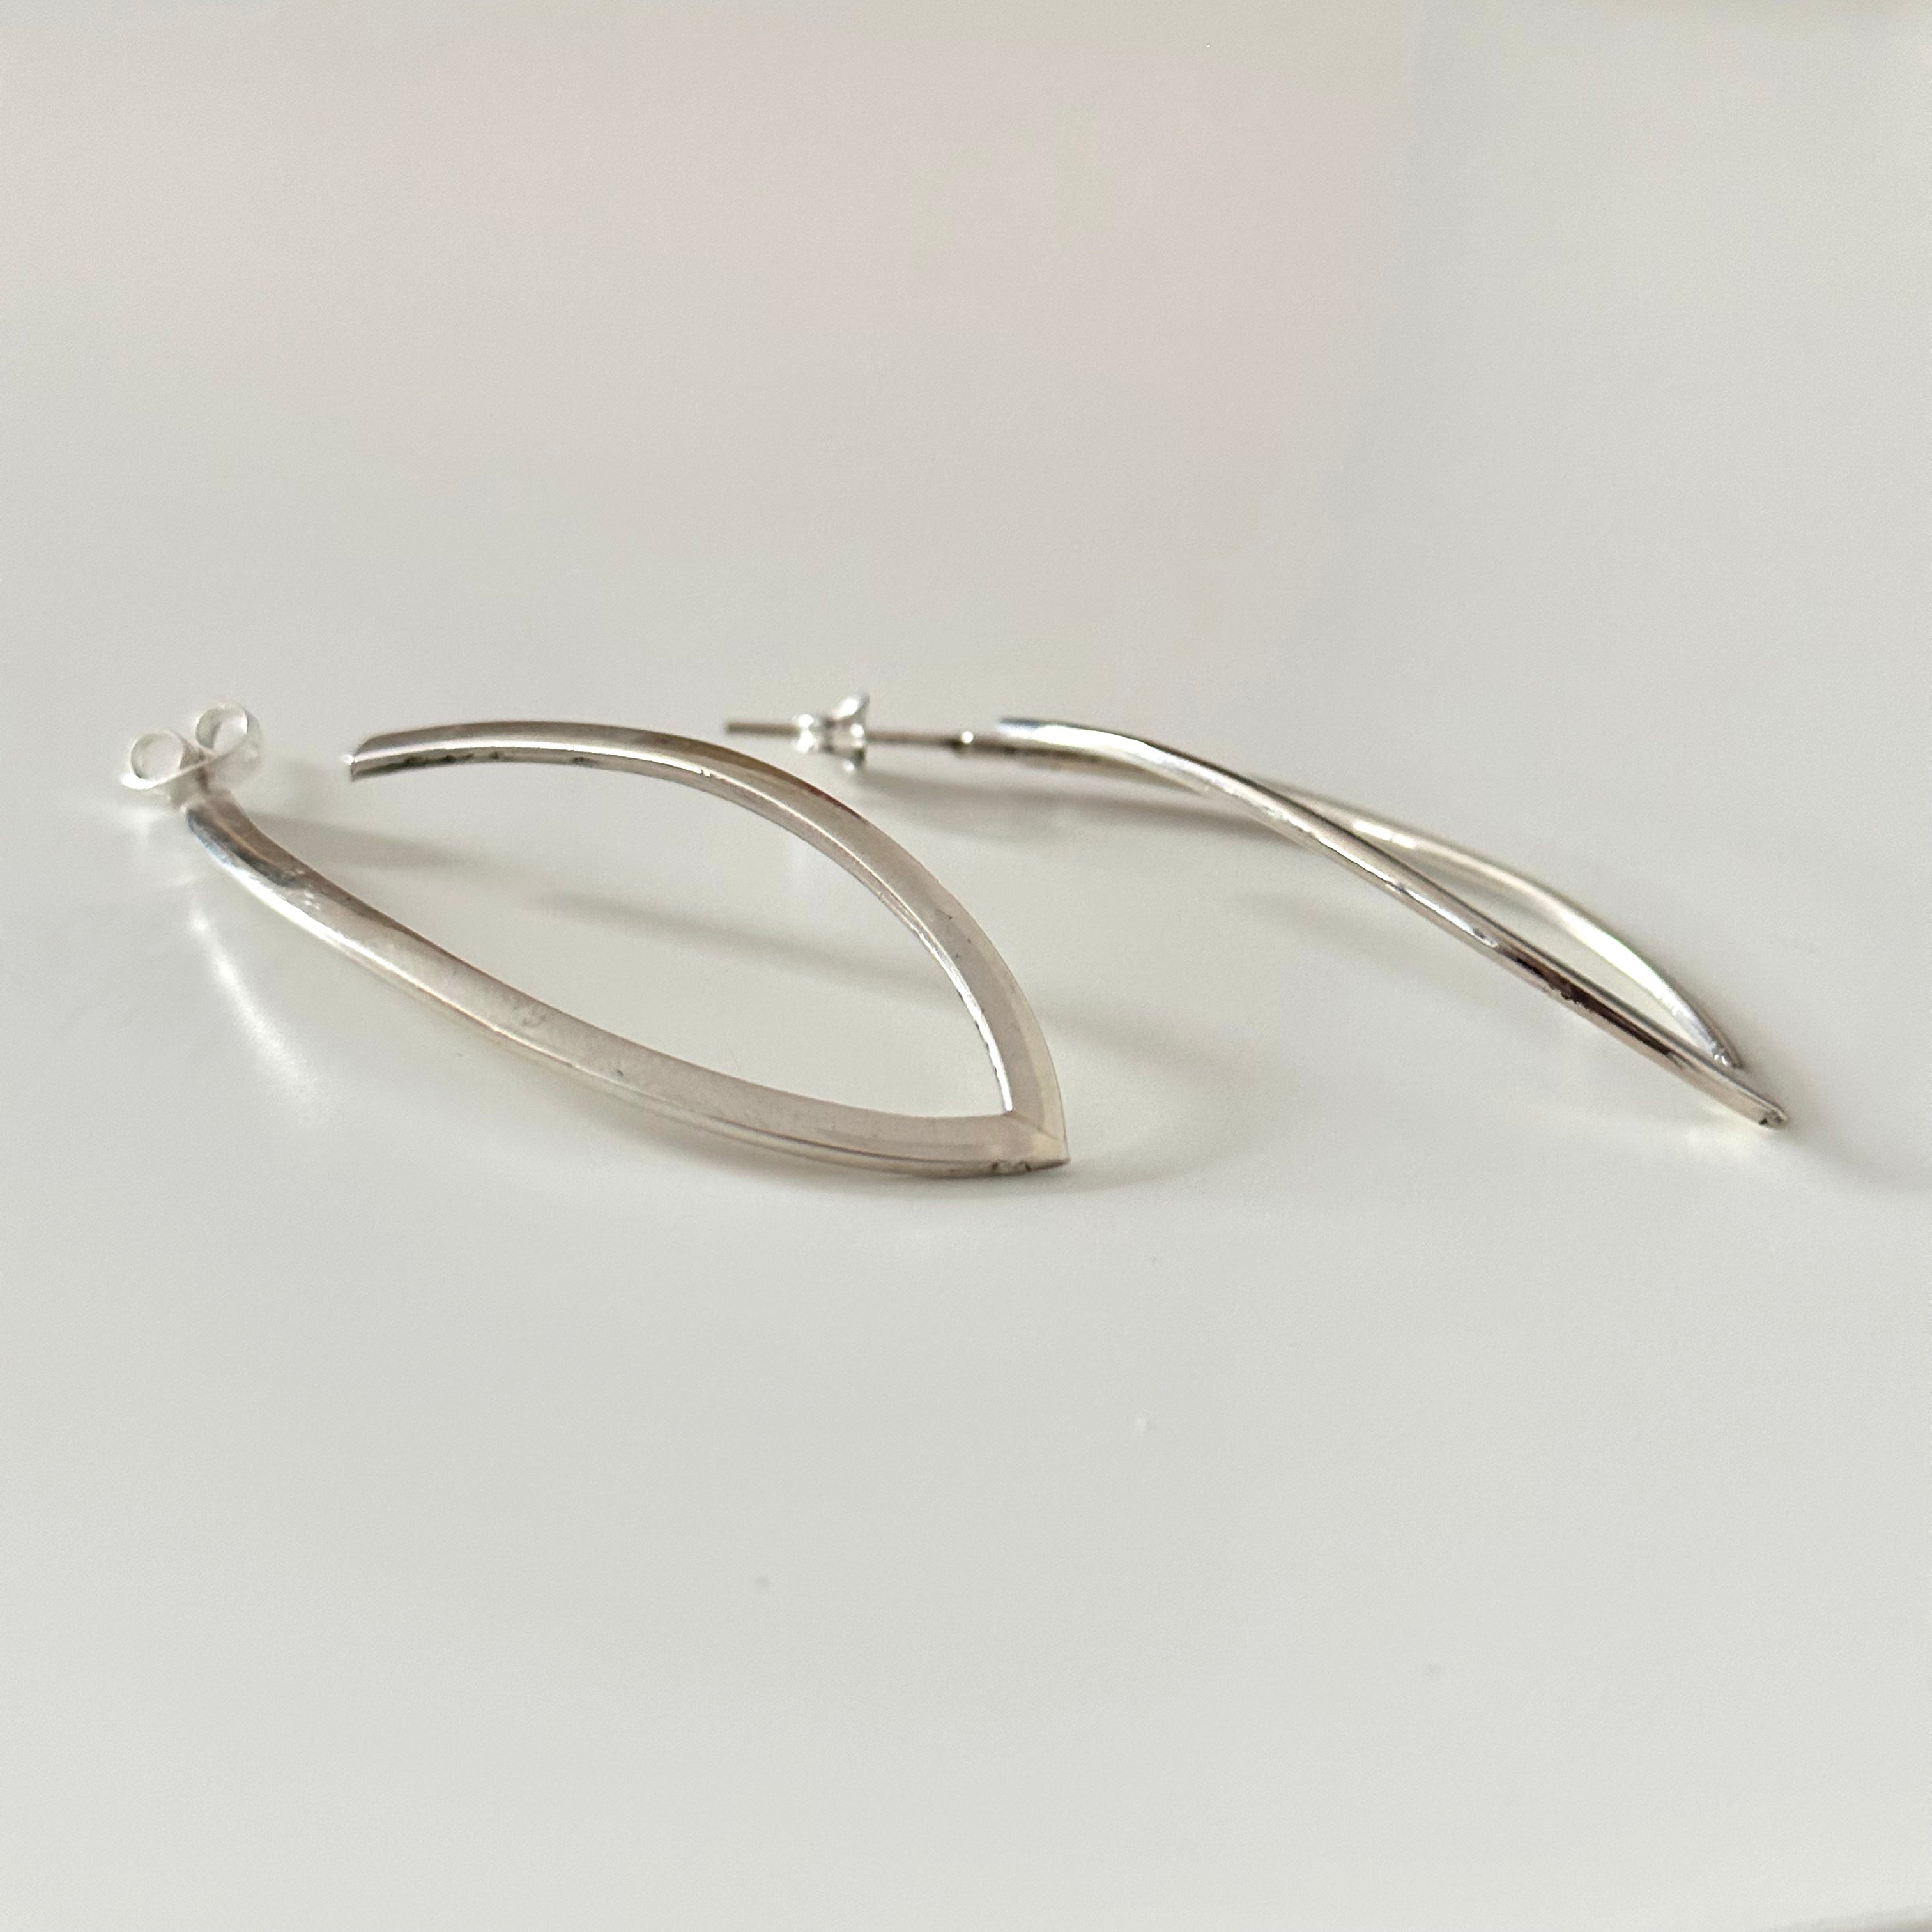 Curved Sterling Silver Hoops in a Leaf Like Shape